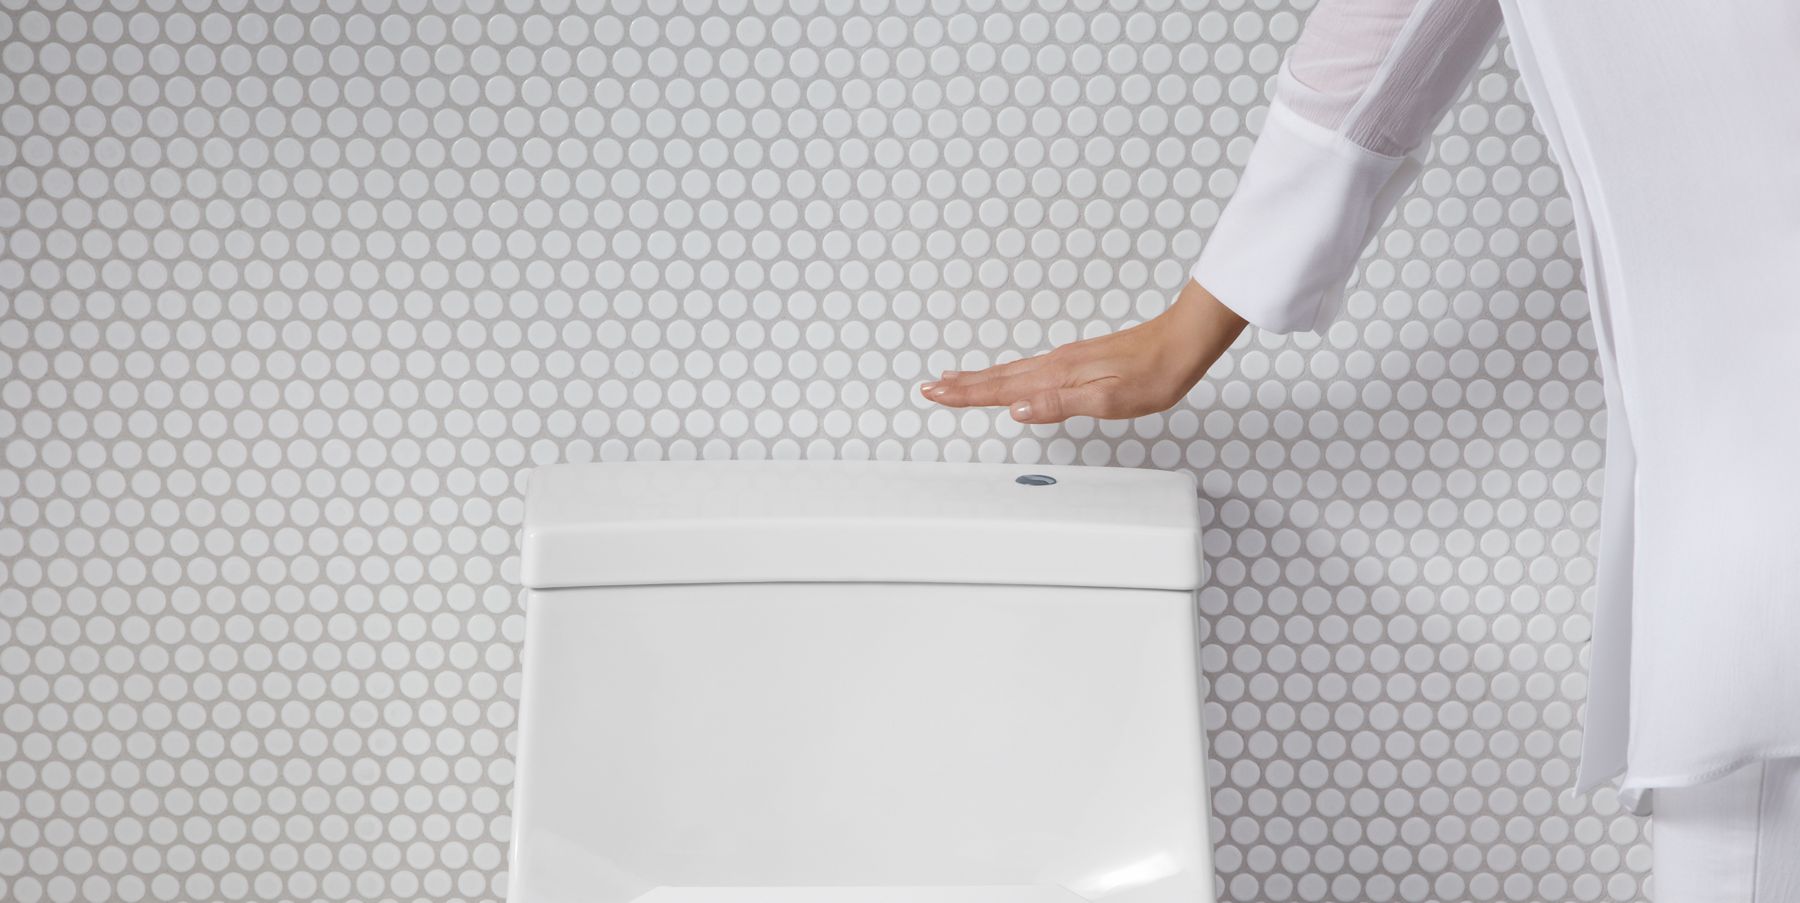 Touchless Toilets